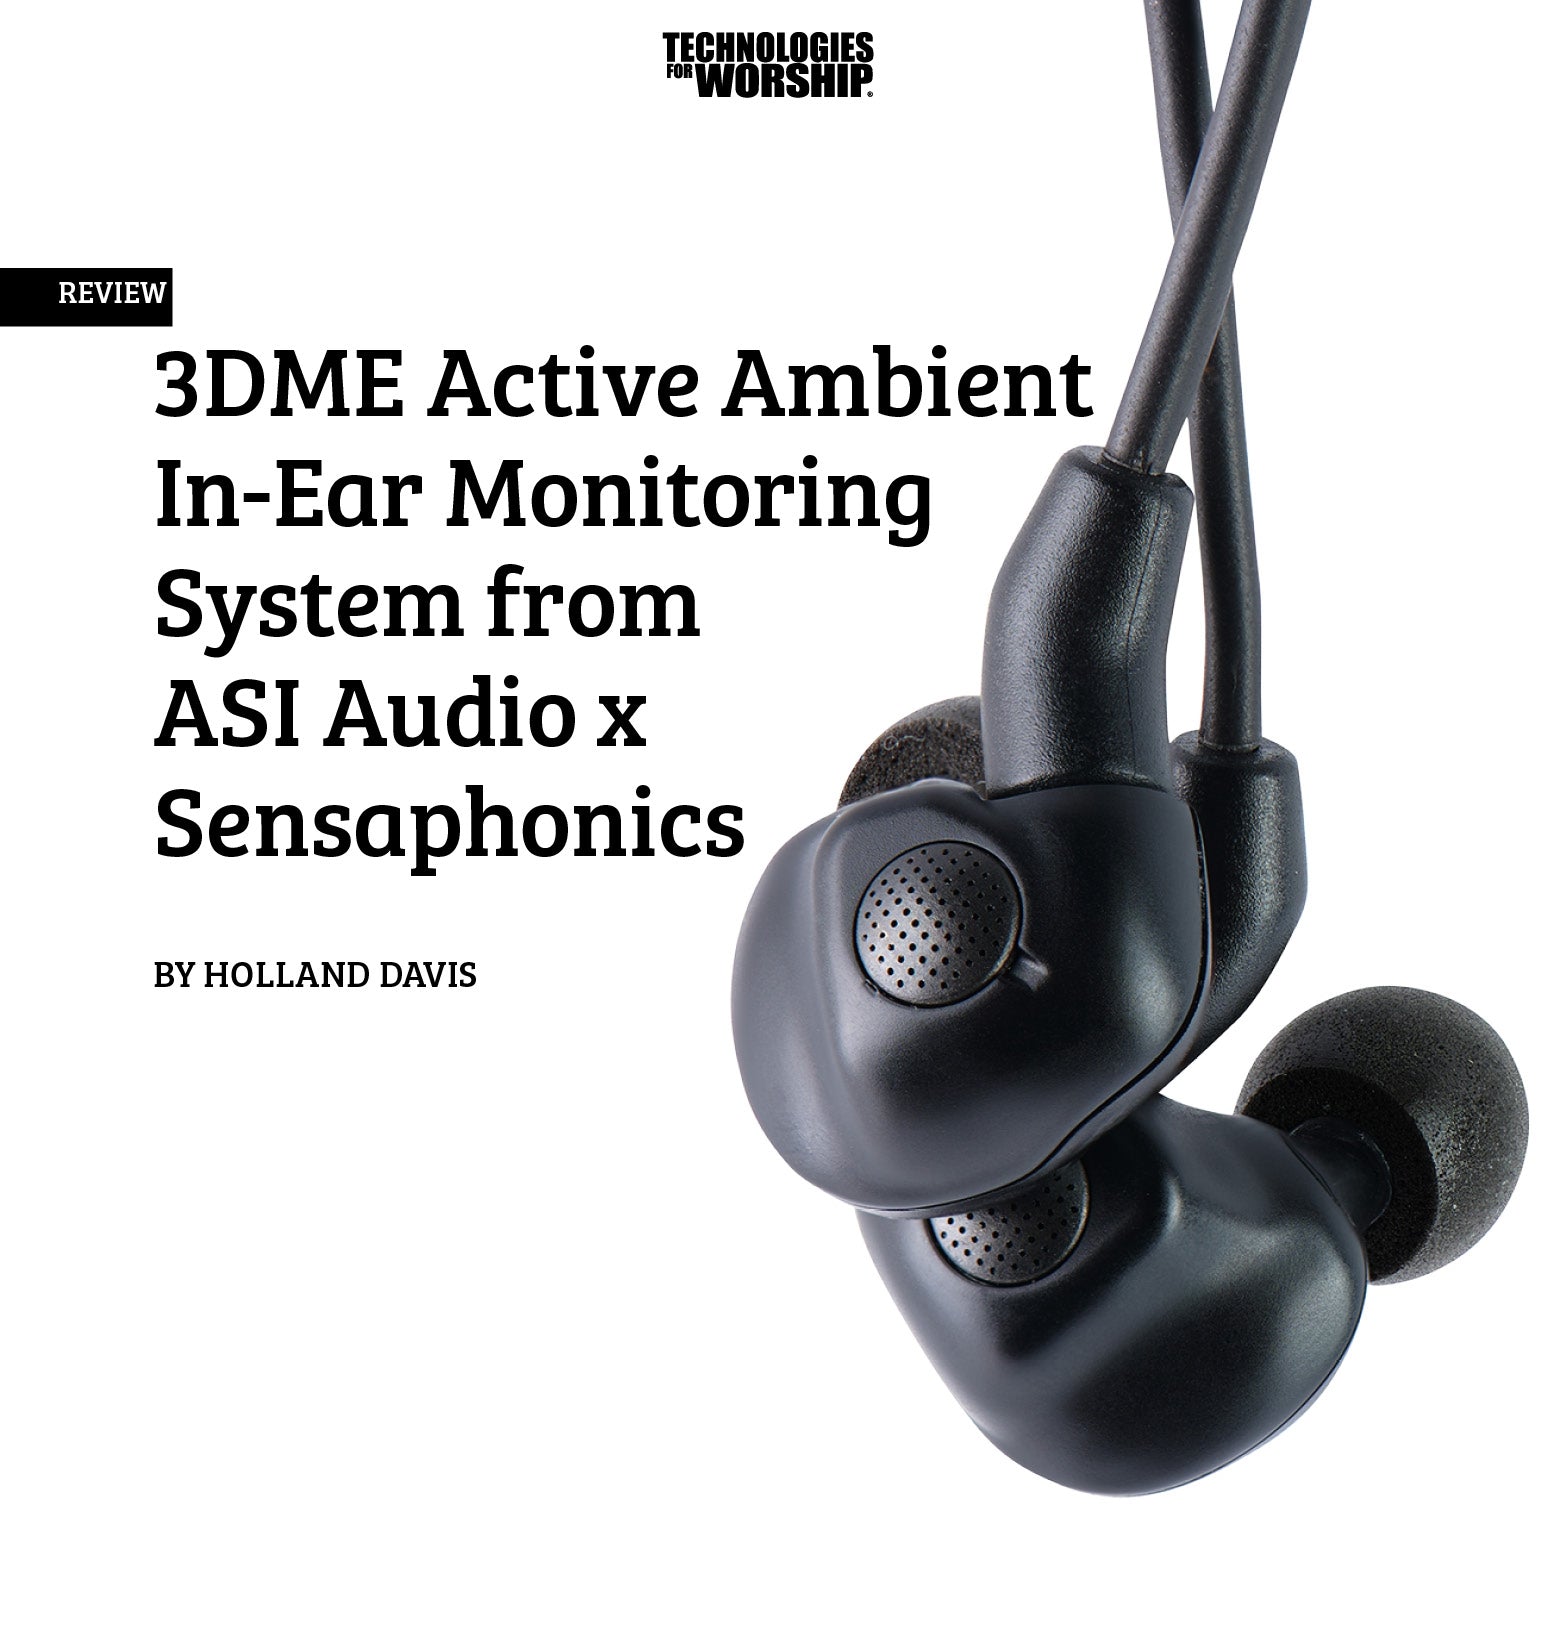 “A new way to hear music” – 3DME reviewed